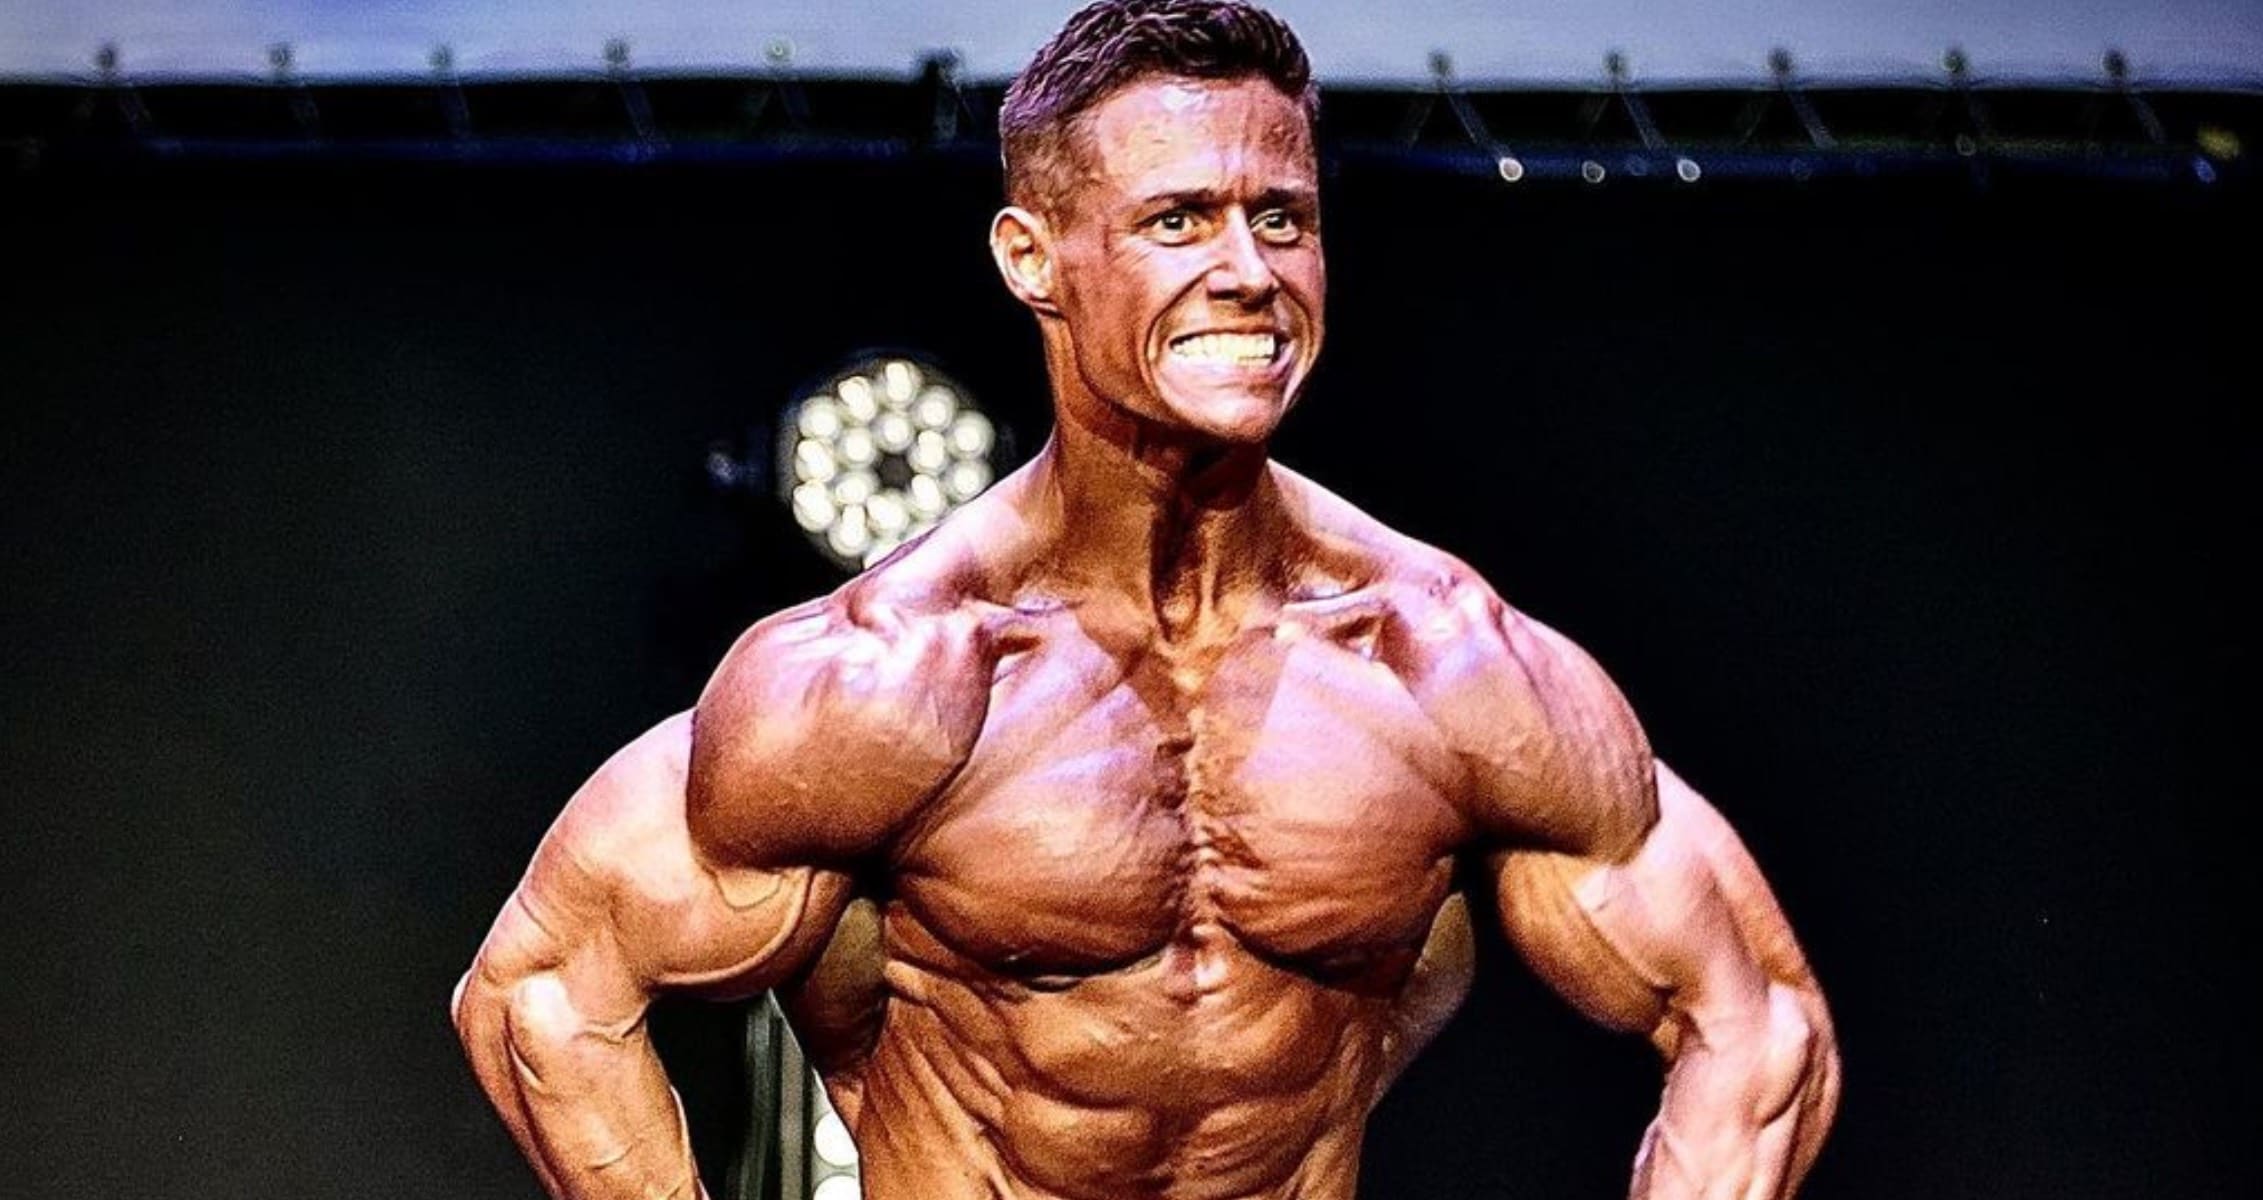 PNBA Bodybuilder Mitch Jarvis Uncovers Mind-blowing Leg